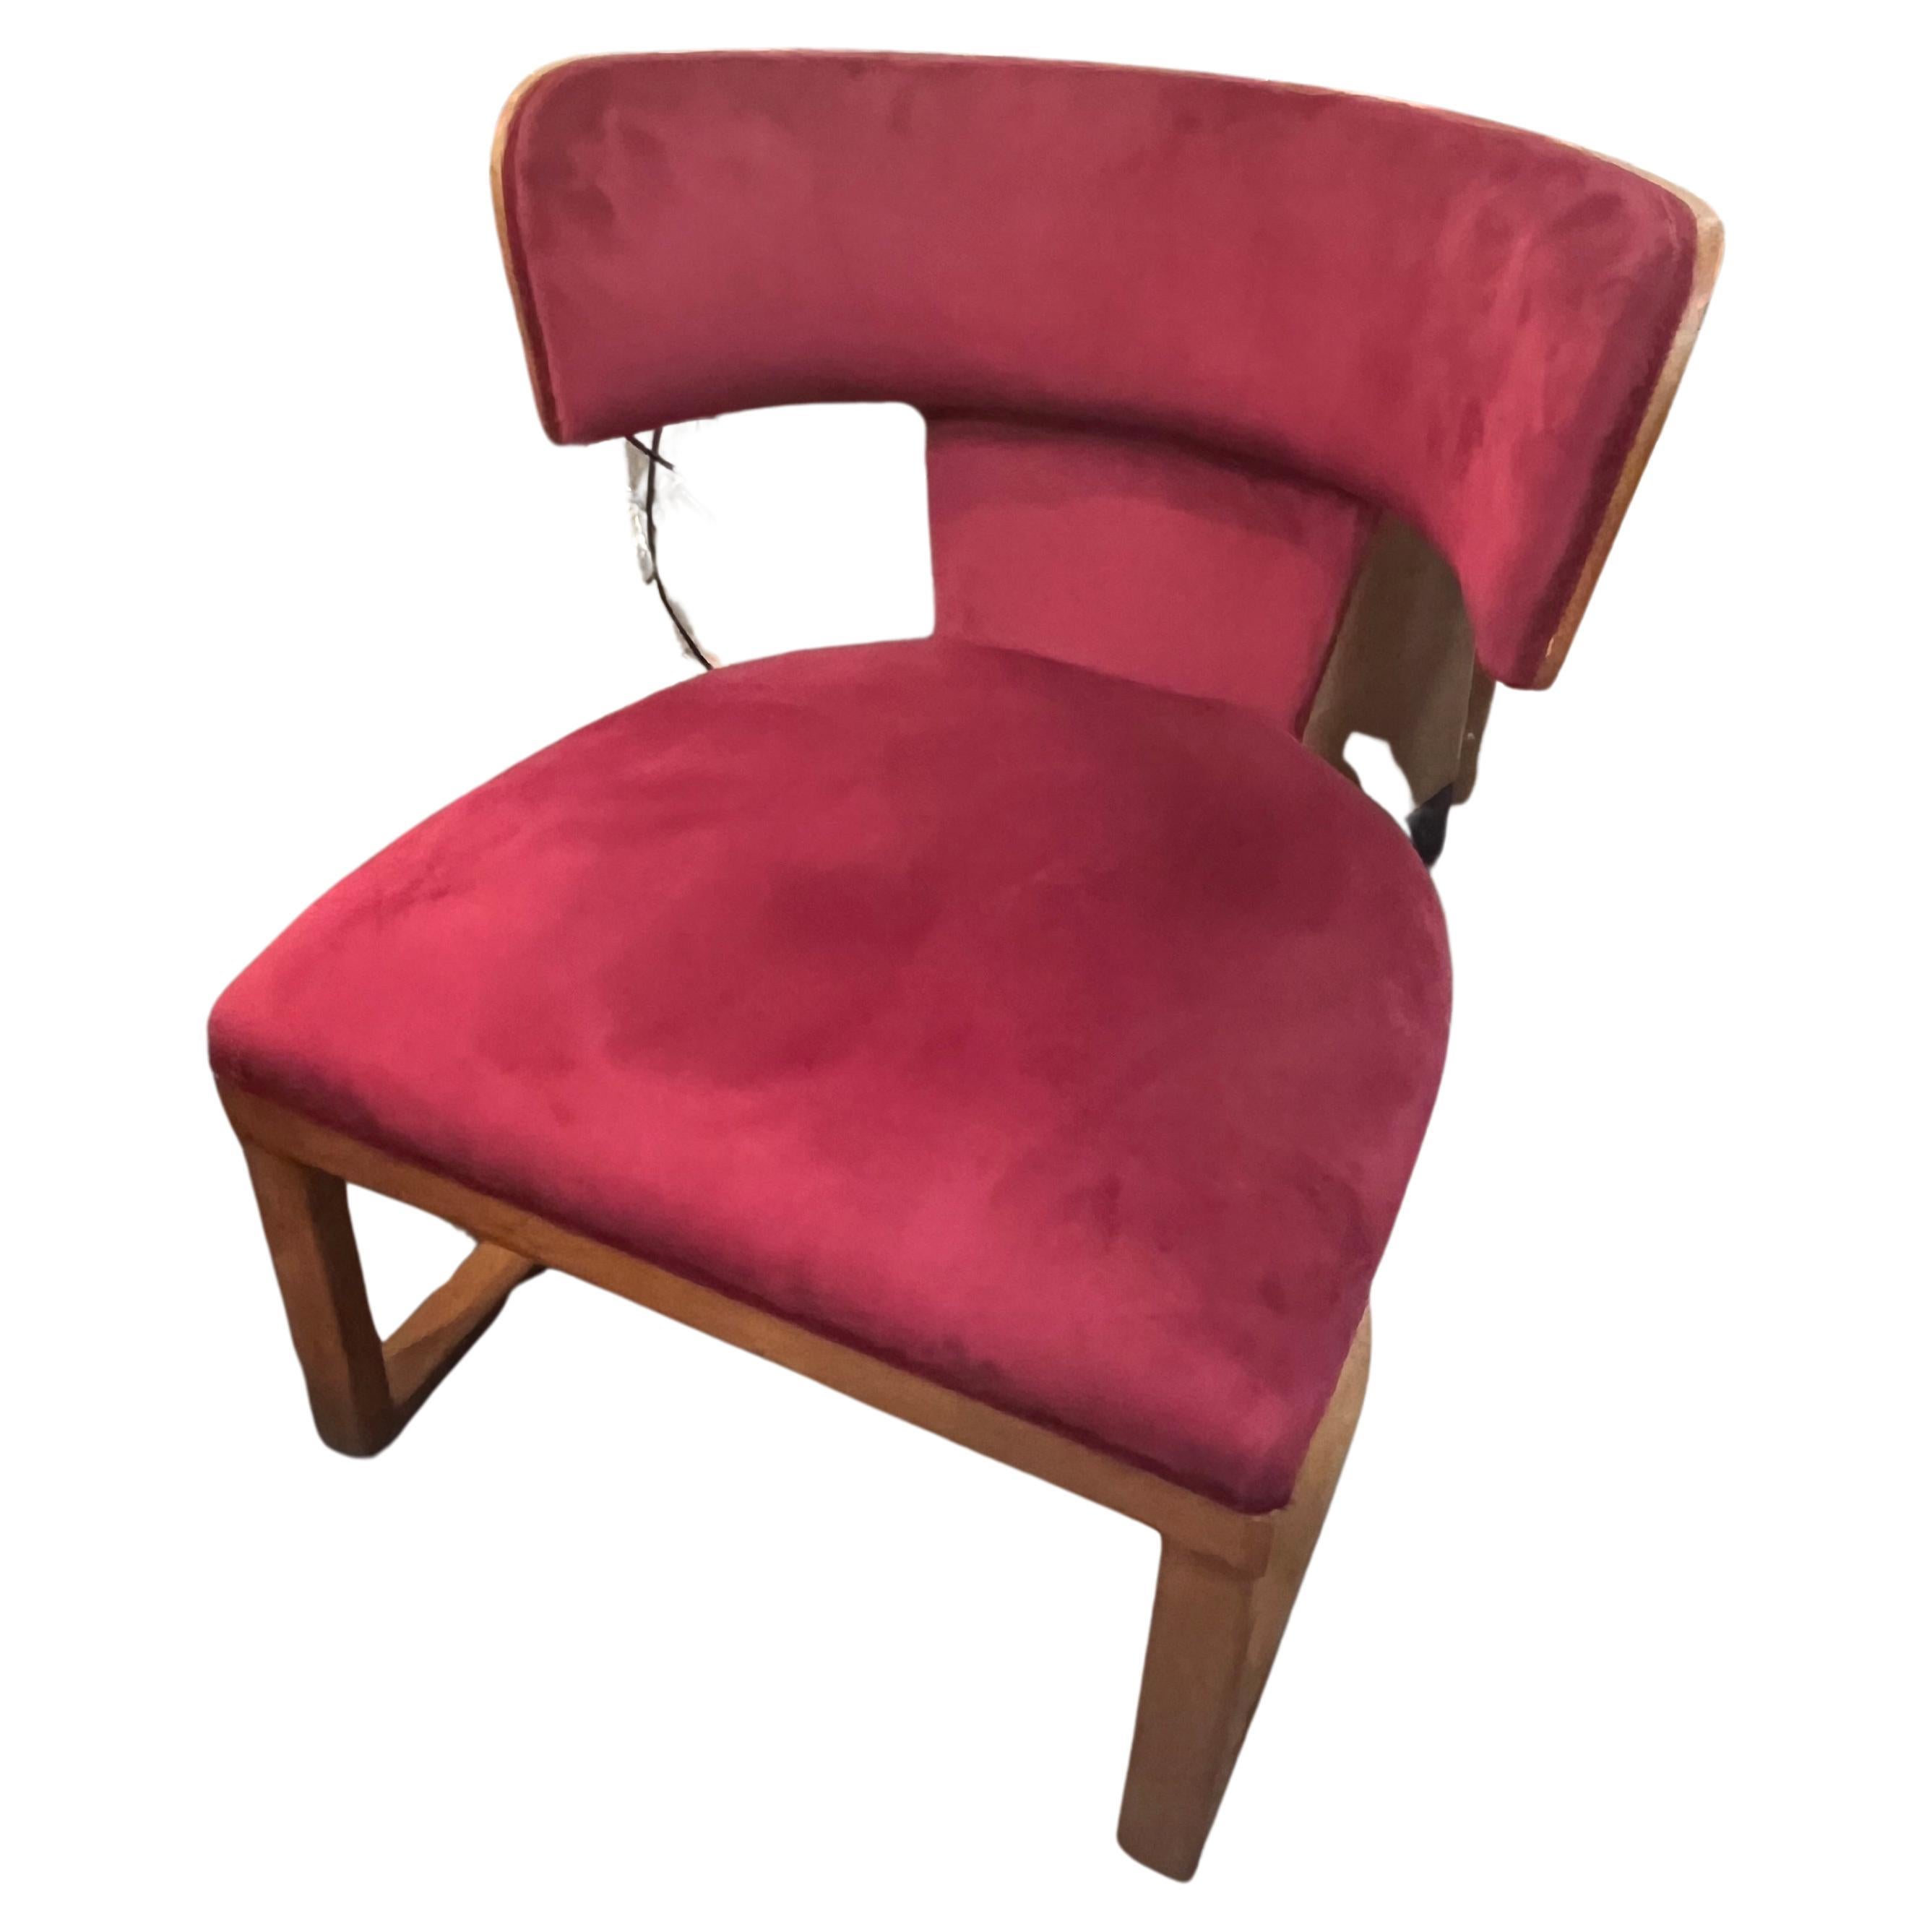 Rare Art Deco Armchair by Ernesto Lapadula with Walnut wood frame and Fuchsia Velvet.
The armchair designed by Ernesto Lapadula from the Italian Art Deco period, circa 1930. 
features a walnut frame with a curved wooden back that extends along the